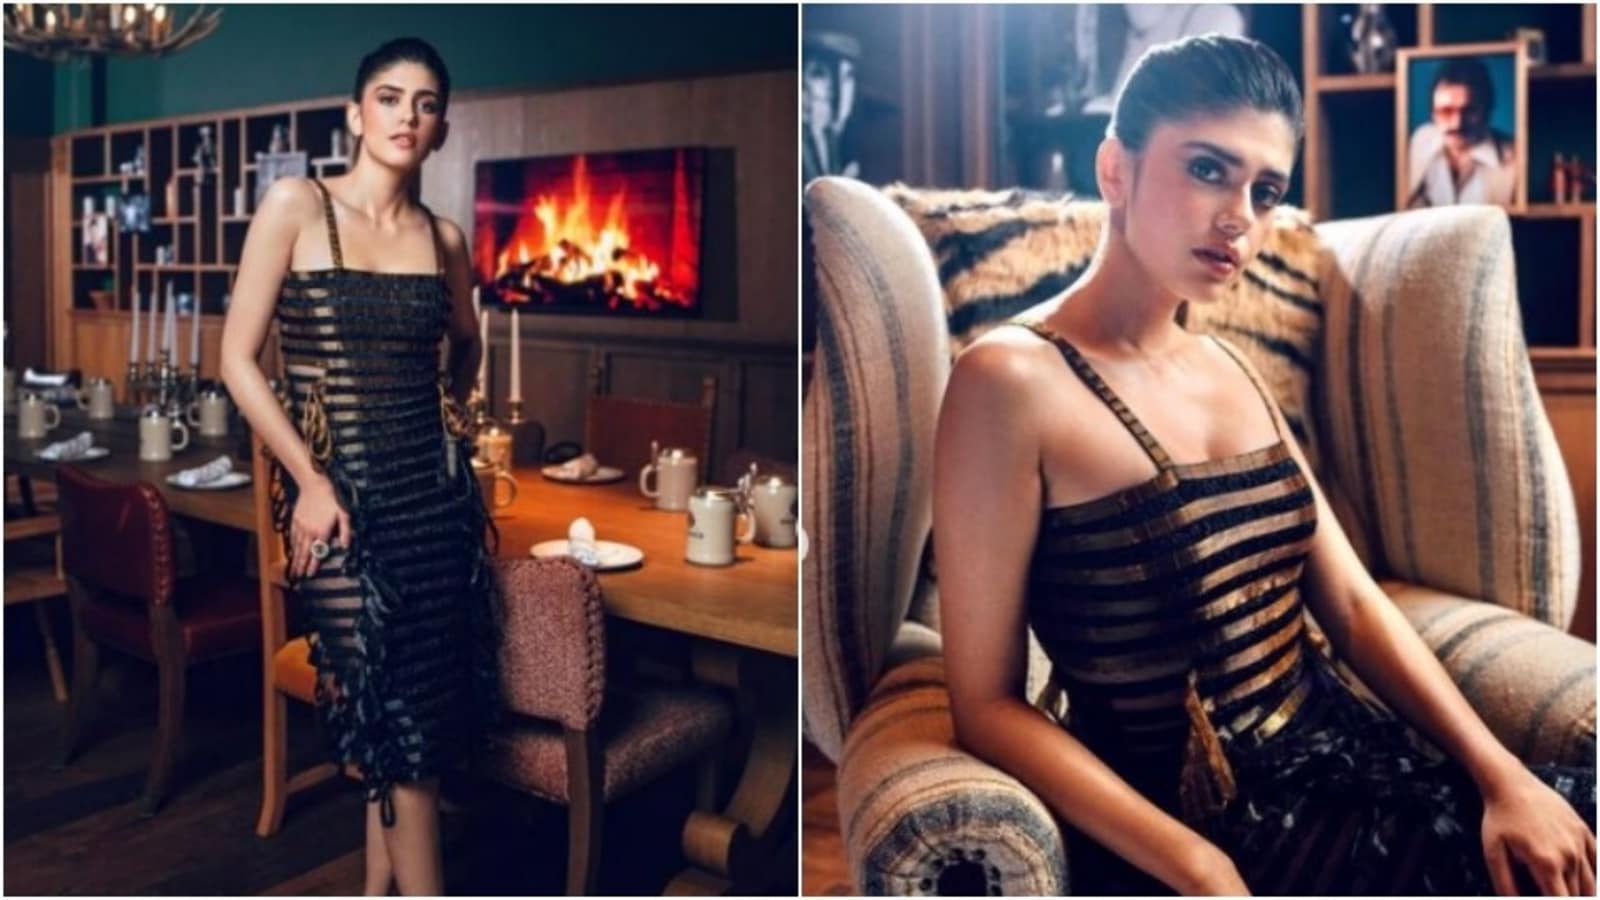 Sanjana Sanghi, in a gold and black dress, urges fans to ‘take it easy’